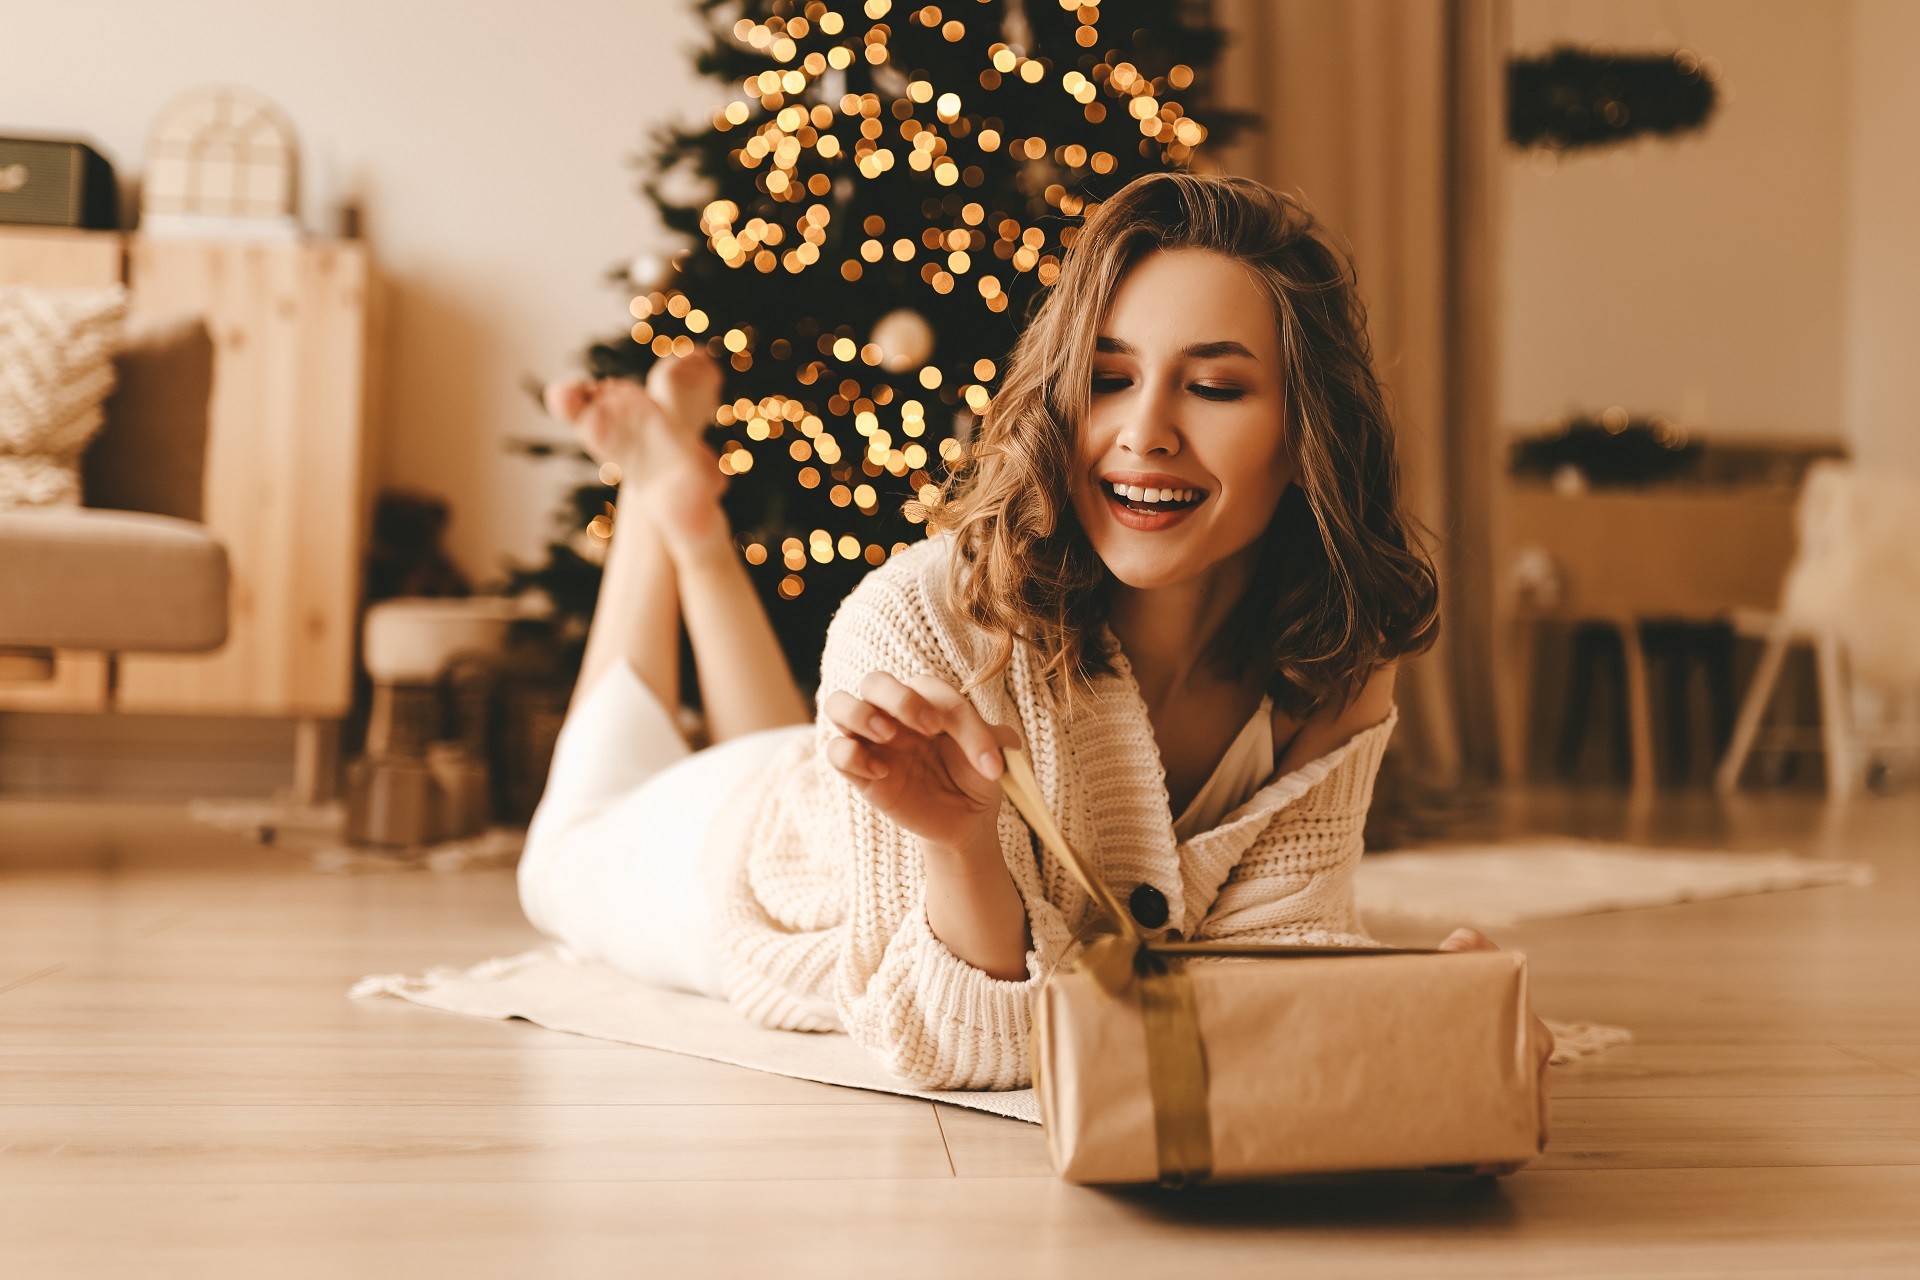 7 Amazing Benefits of Being Single during the Holiday Season